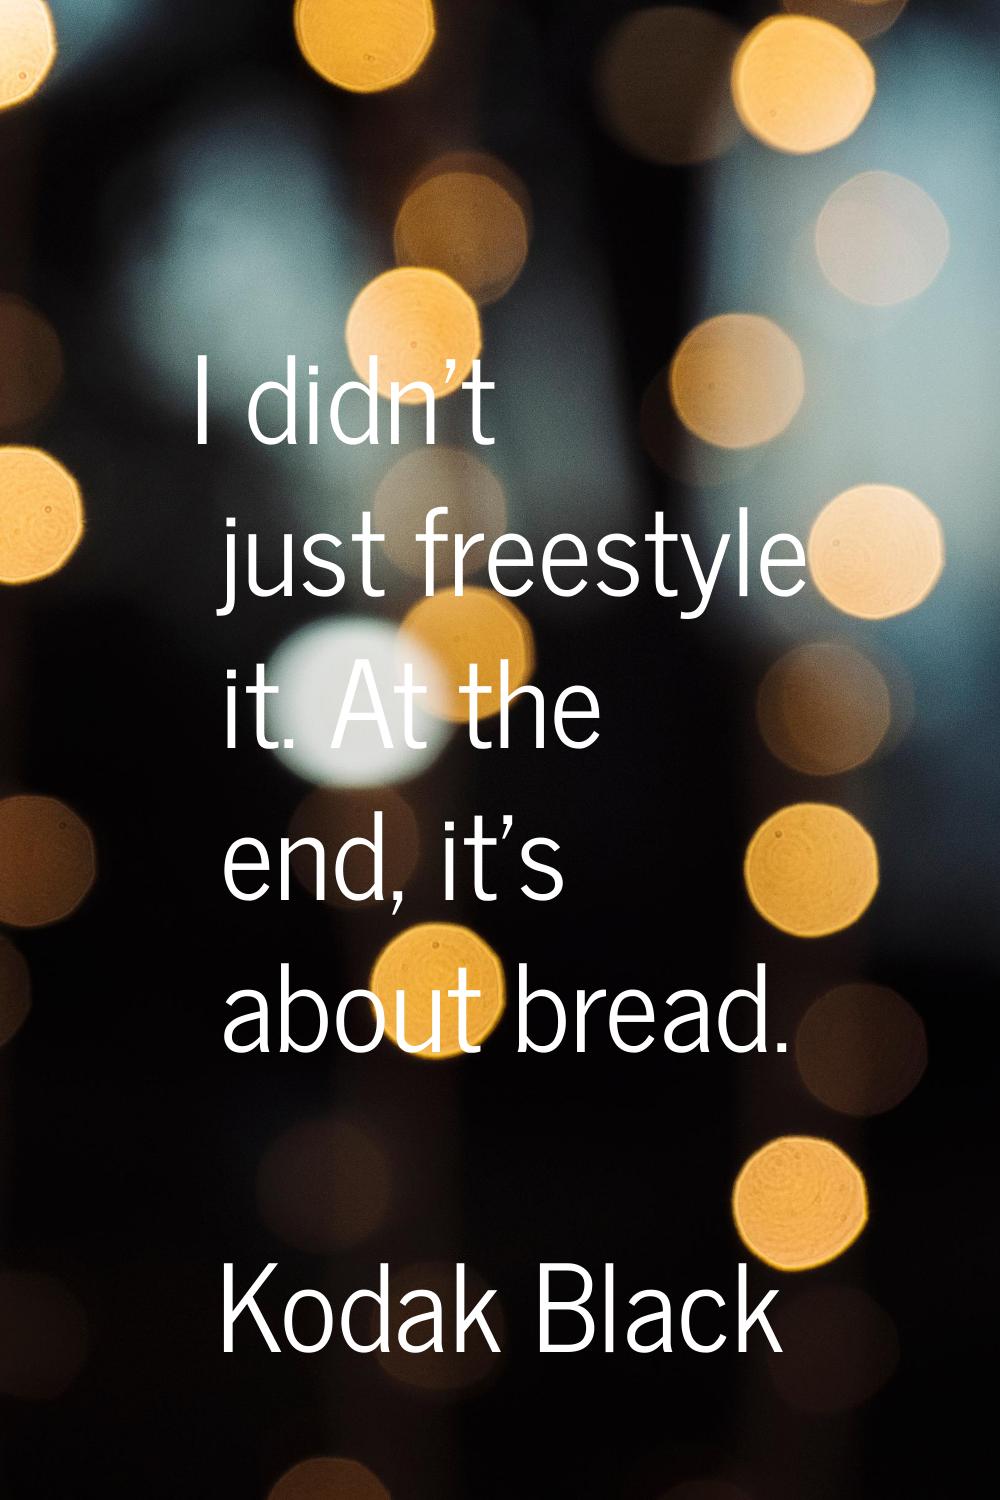 I didn't just freestyle it. At the end, it's about bread.